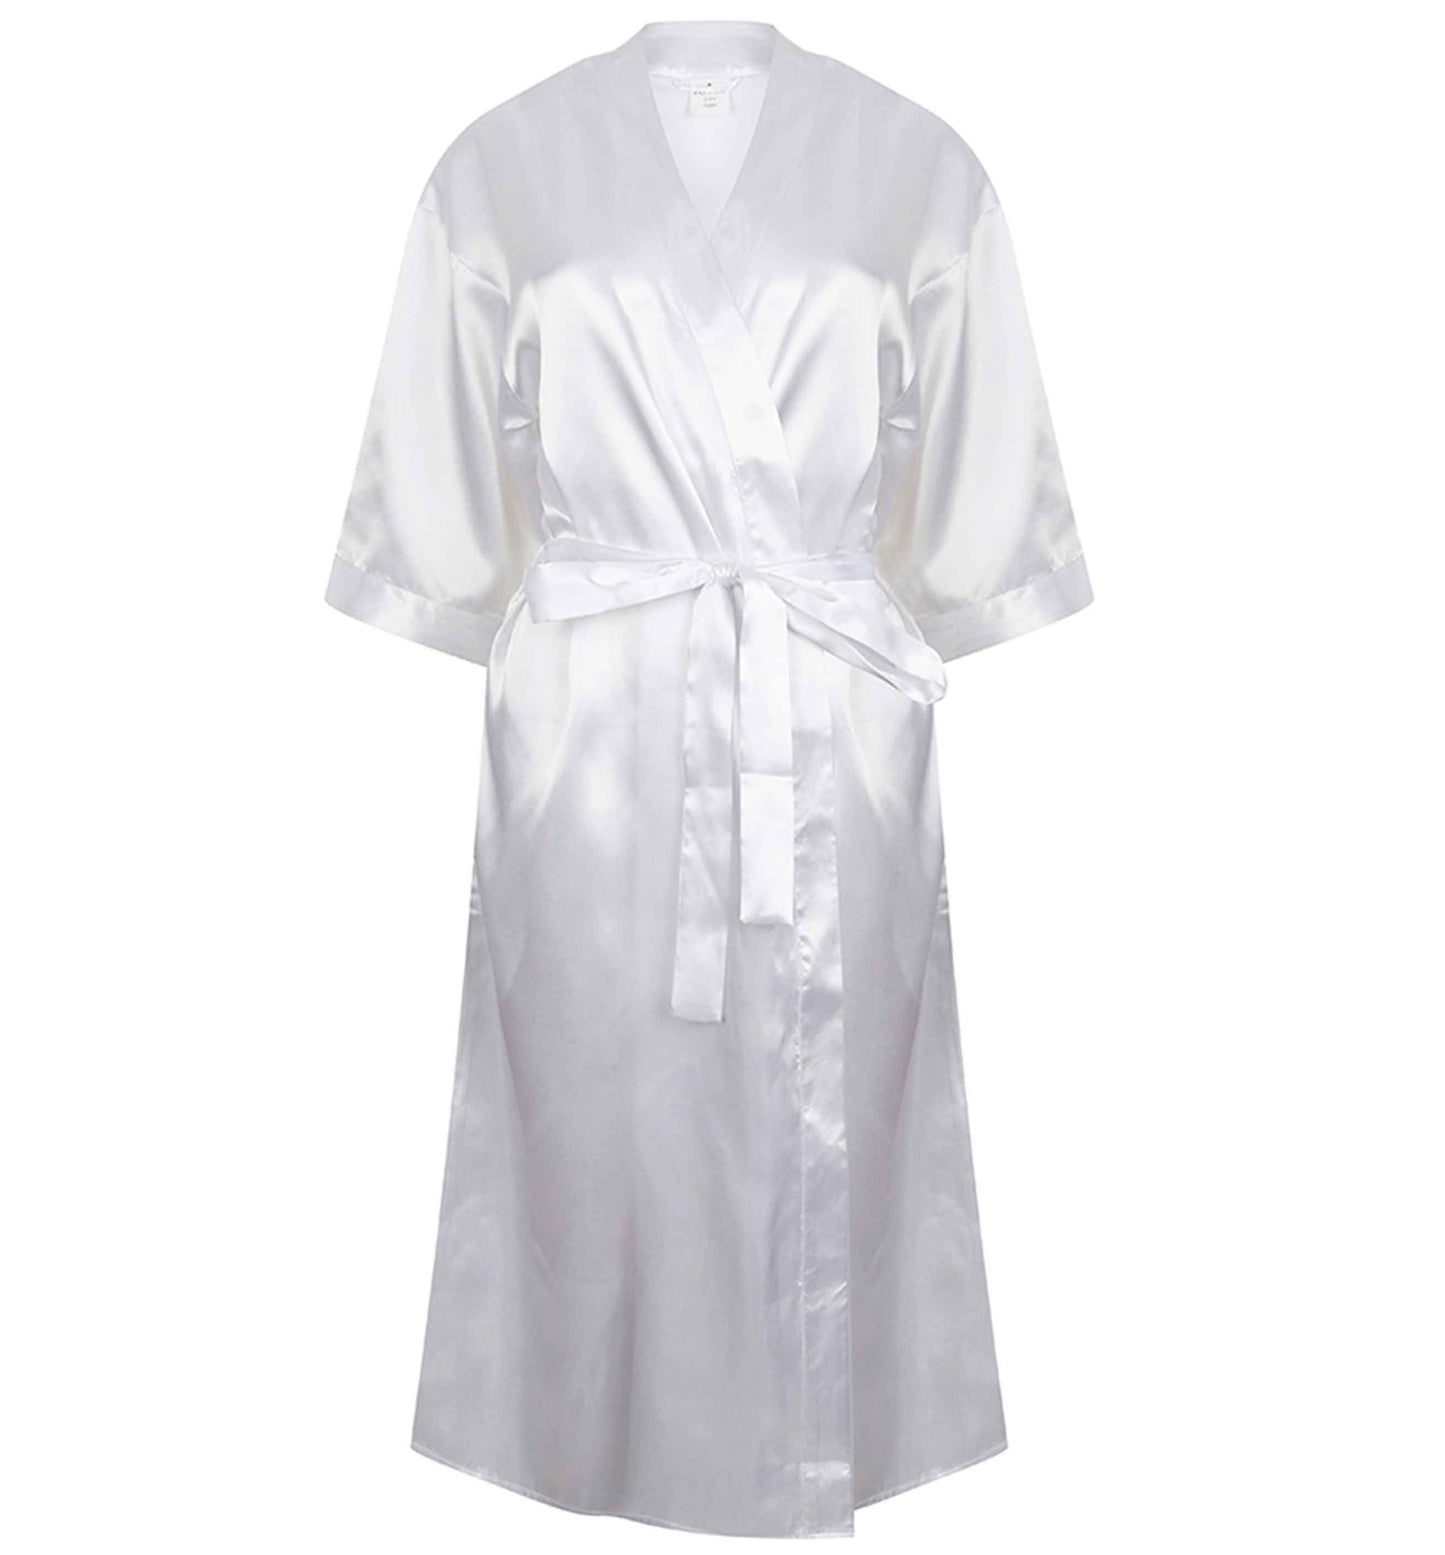 Out of my way I'm shopping for my wedding dress | 8-18 | Kimono style satin robe | Ladies dressing gown